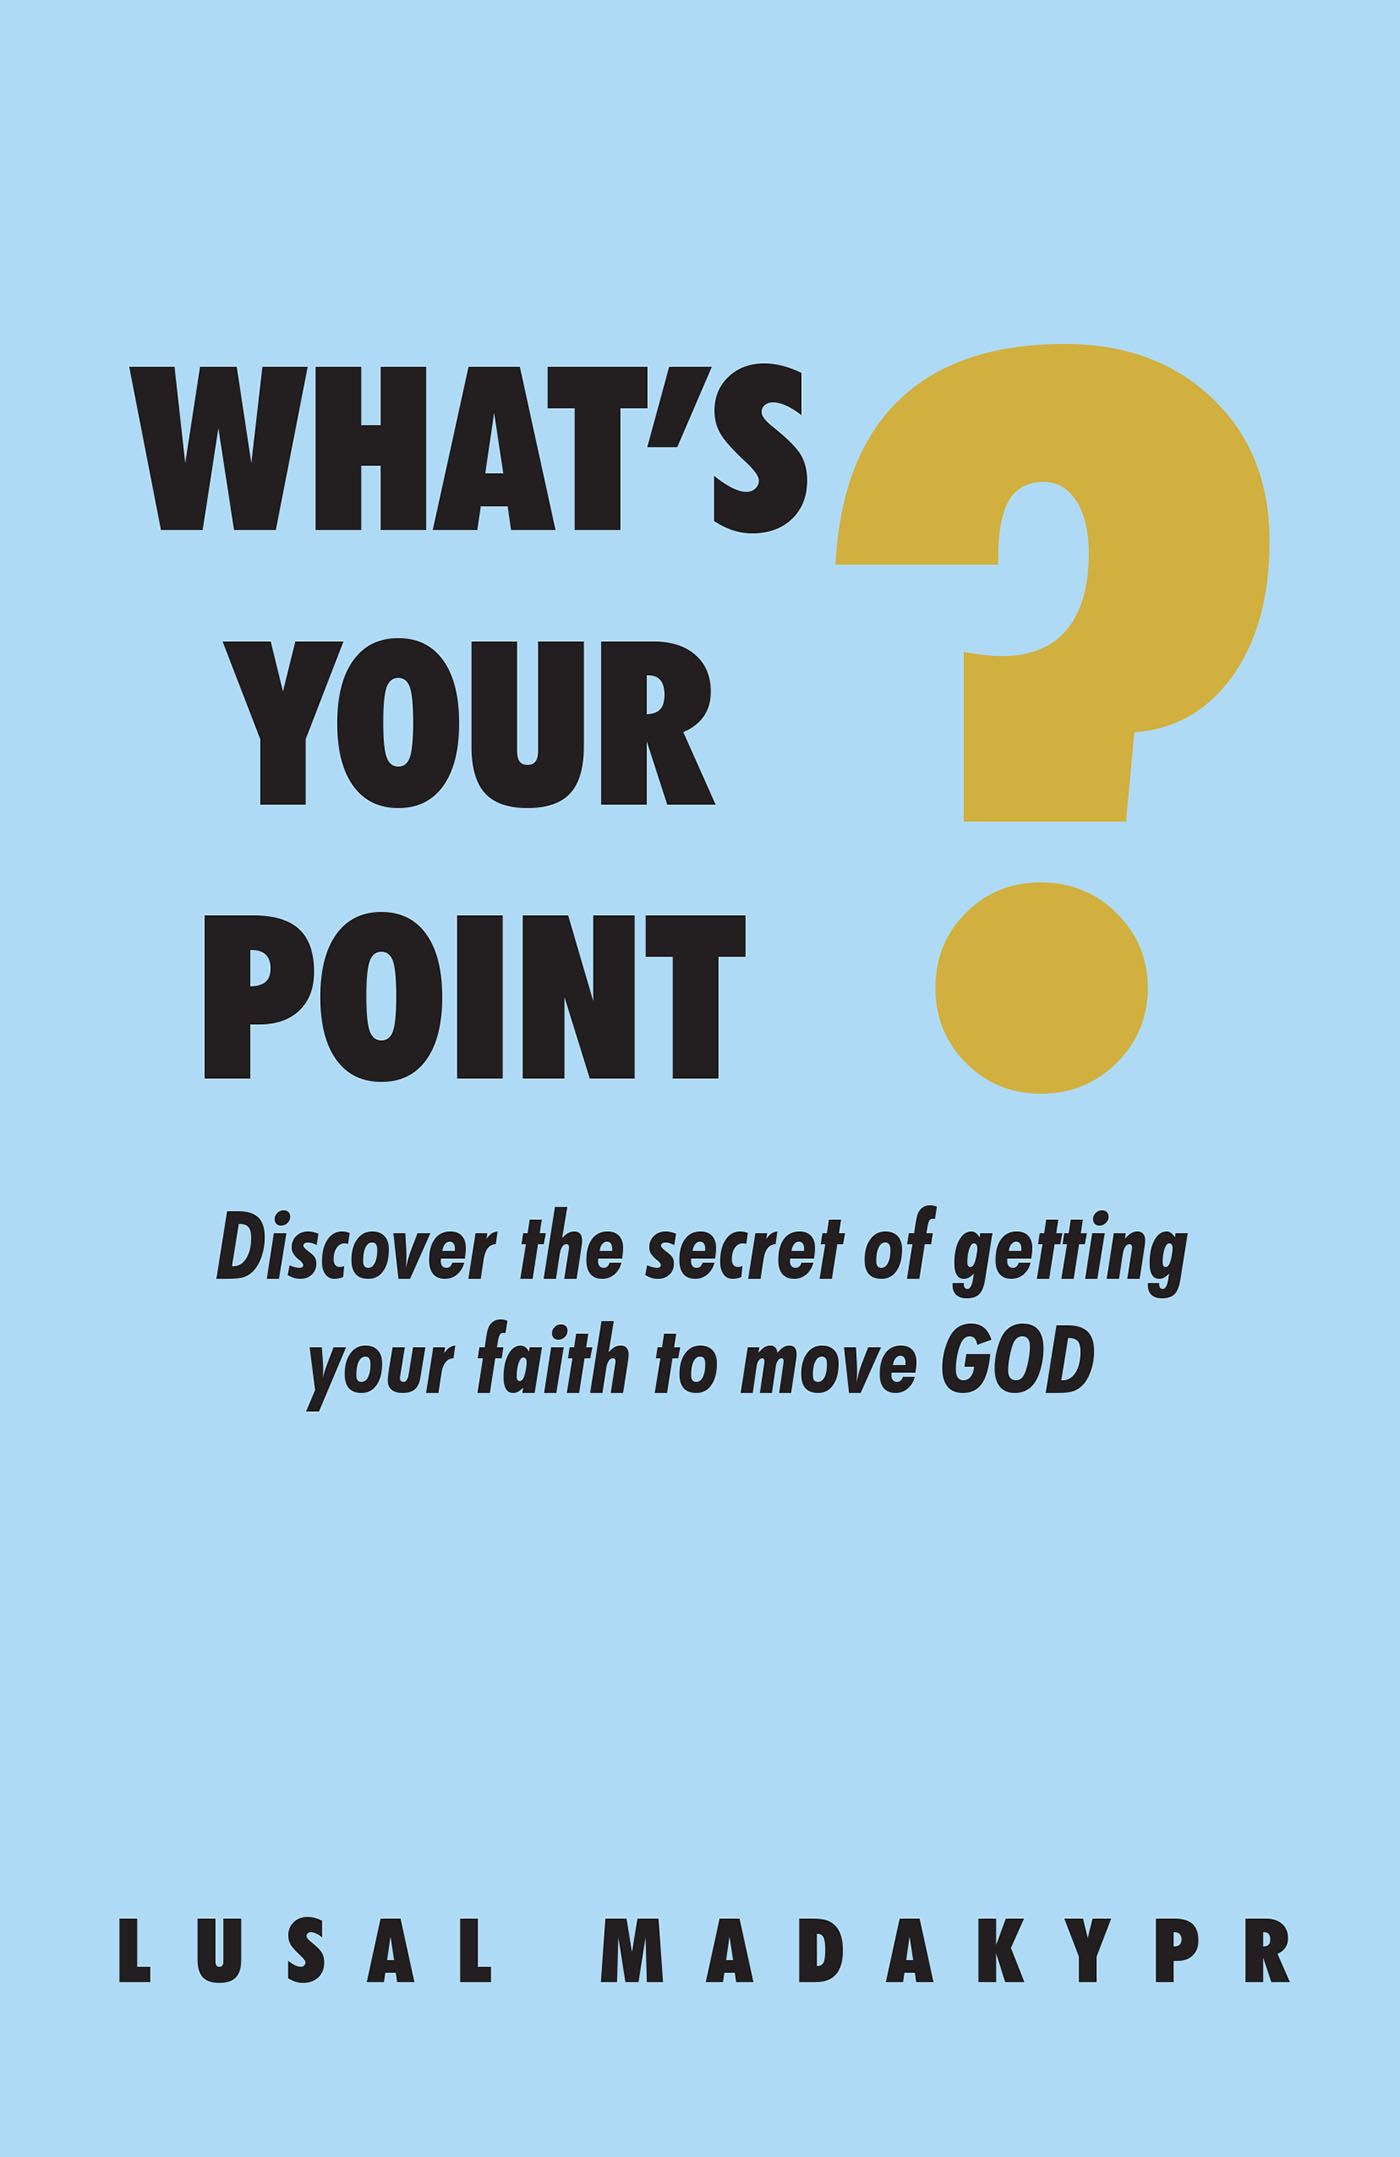 LuSal Madakypr’s Newly Released “What’s Your Point? Discover the secret of getting your faith to move GOD” is an Engaging Study of Effective Prayer Practices